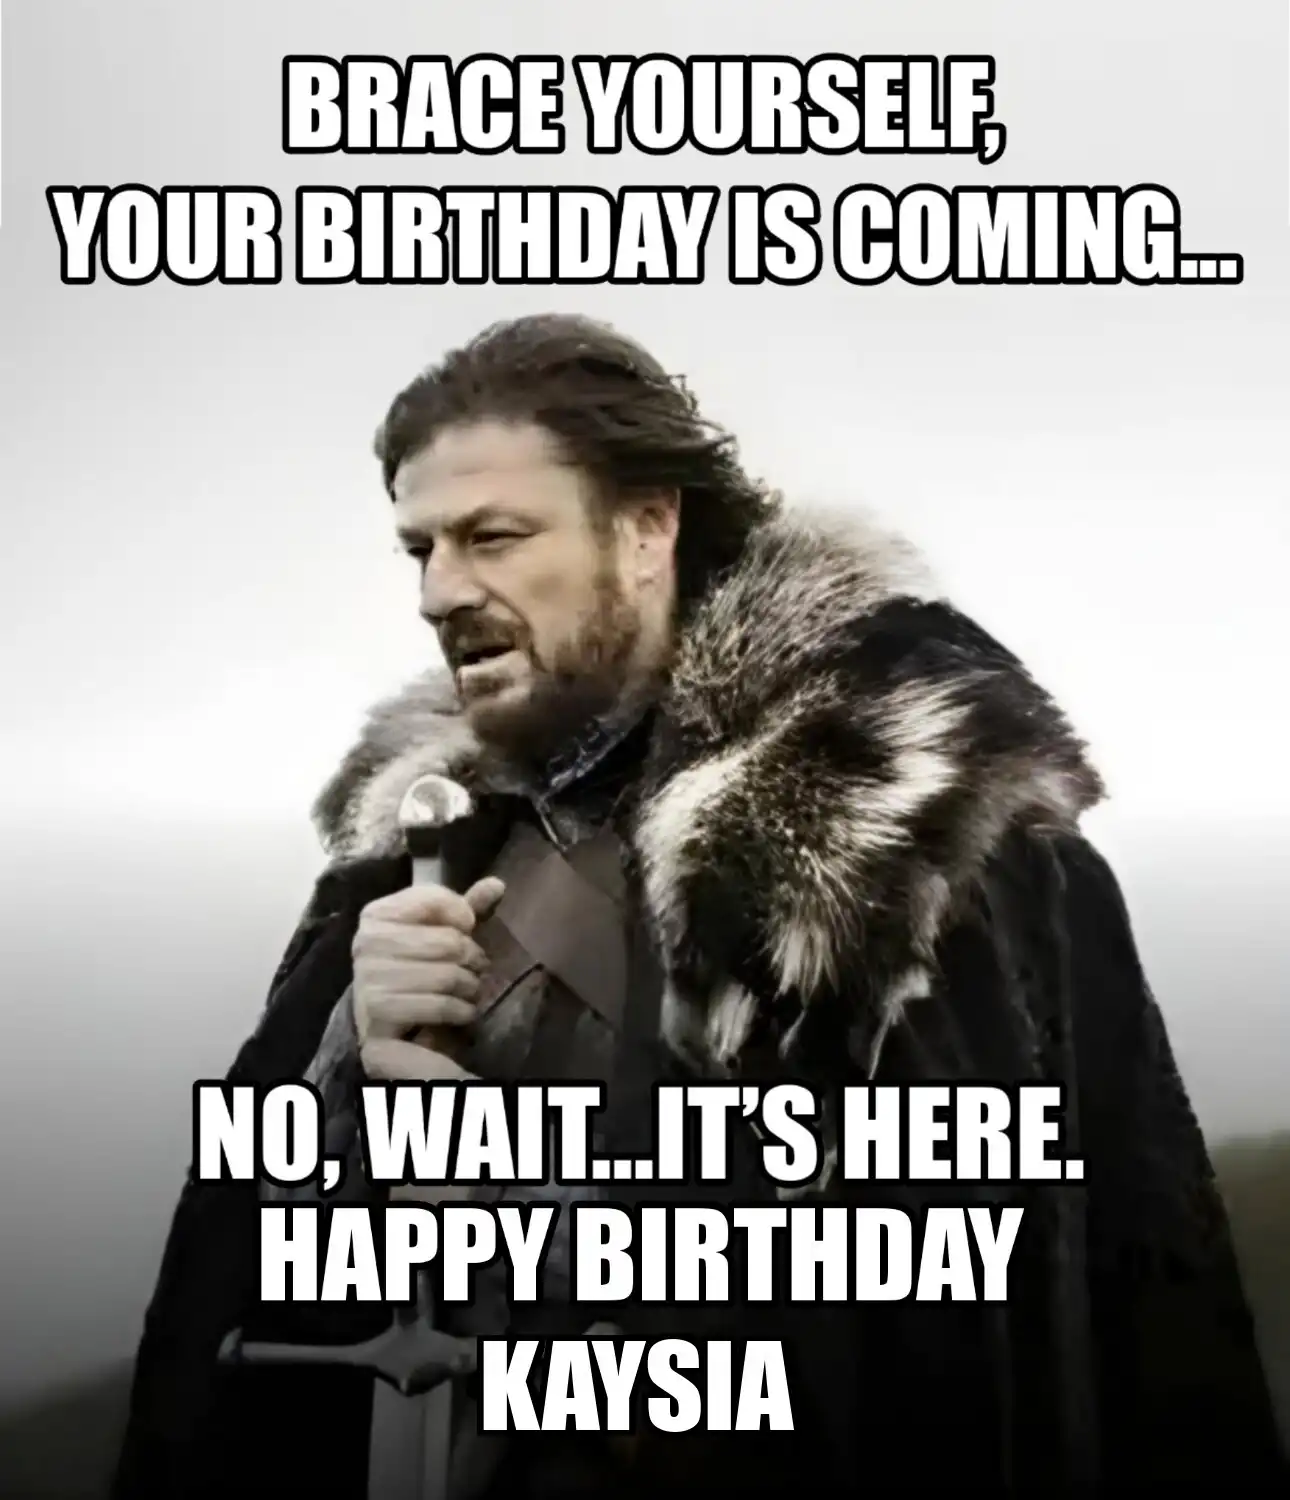 Happy Birthday Kaysia Brace Yourself Your Birthday Is Coming Meme